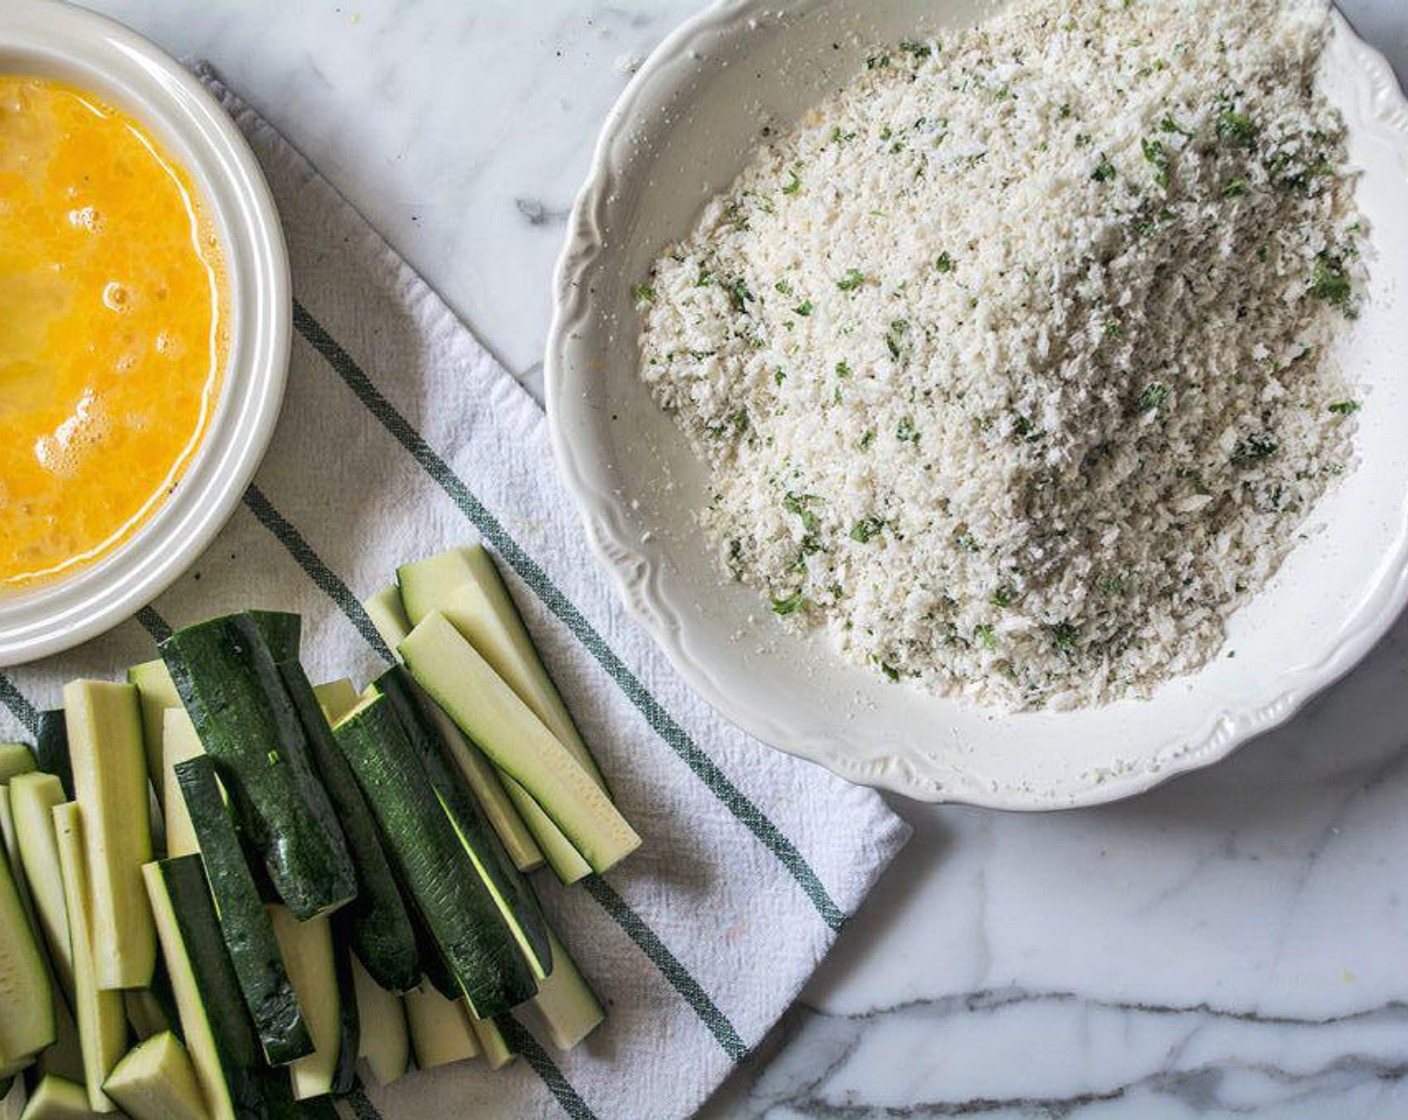 step 4 In a separate bowl, add Farmhouse Eggs® Large Brown Eggs (2) and beat well. Dip each piece of Zucchini (4) in the eggs, then coat in the panko and parmesan mix, before adding to aluminum-lined baking sheet. Repeat with all zucchini strips and spread out in a single layer.